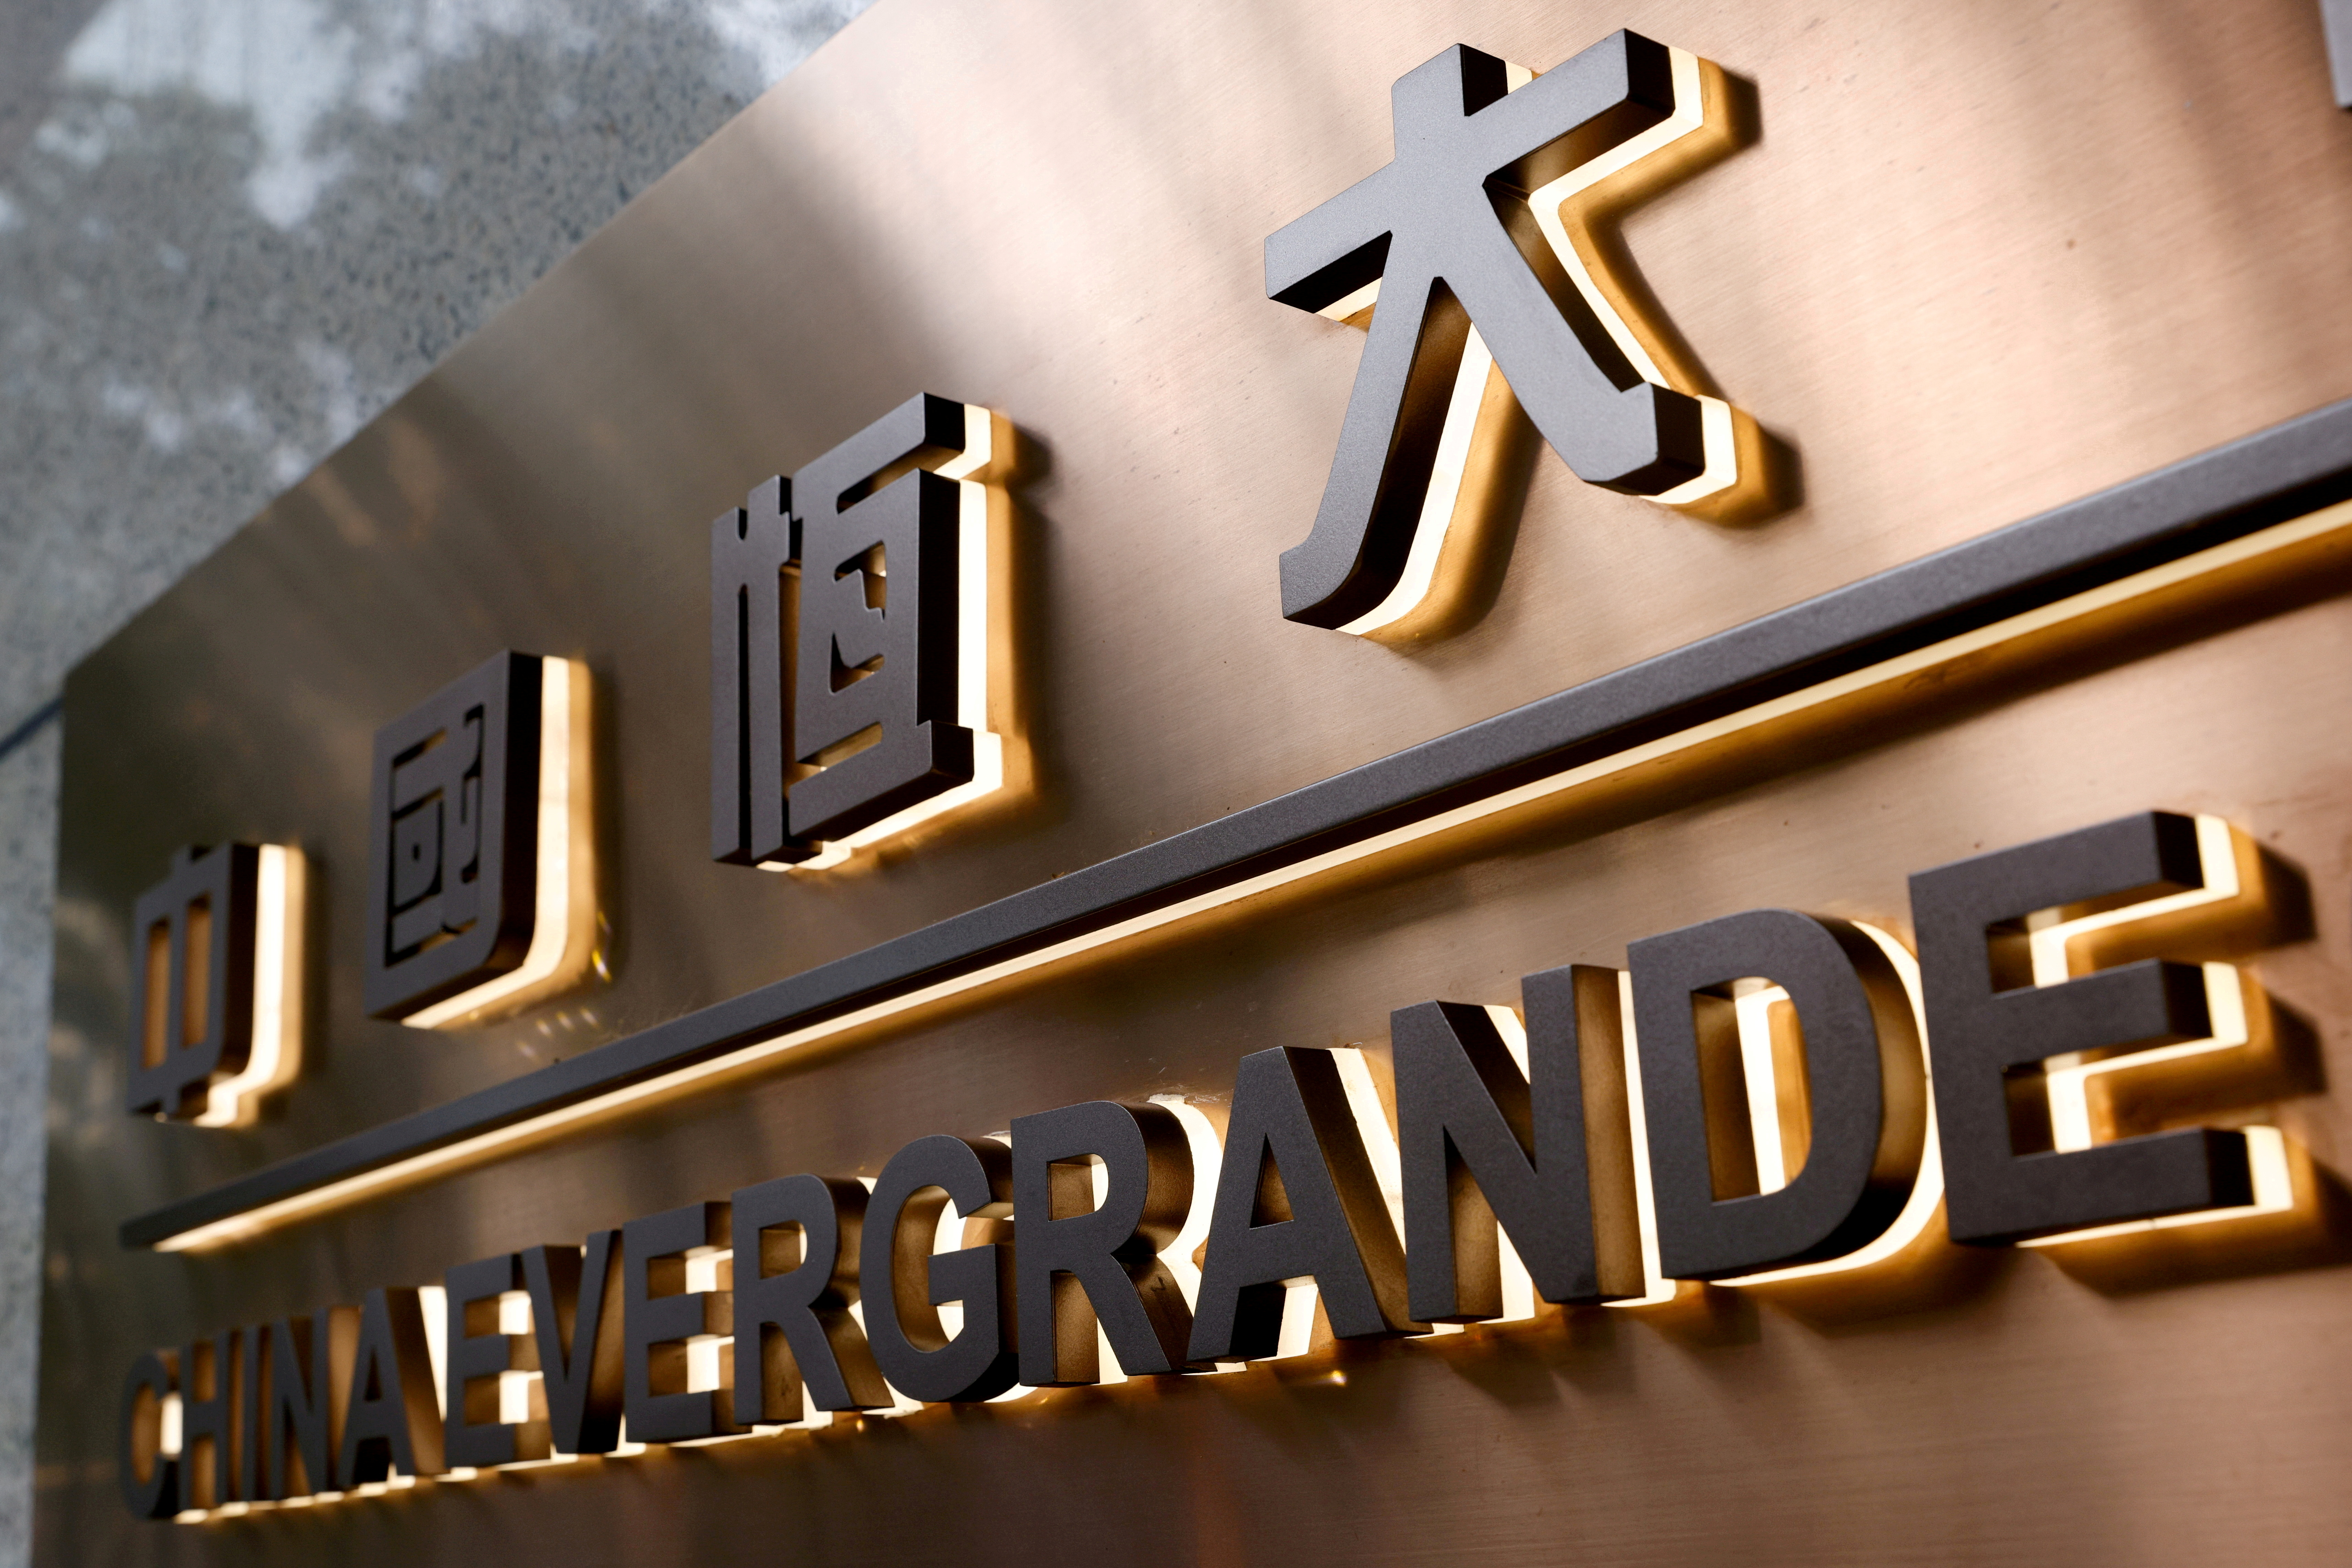 The China Evergrande Centre building sign is seen in Hong Kong, China, September 23, 2021. REUTERS/Tyrone Siu